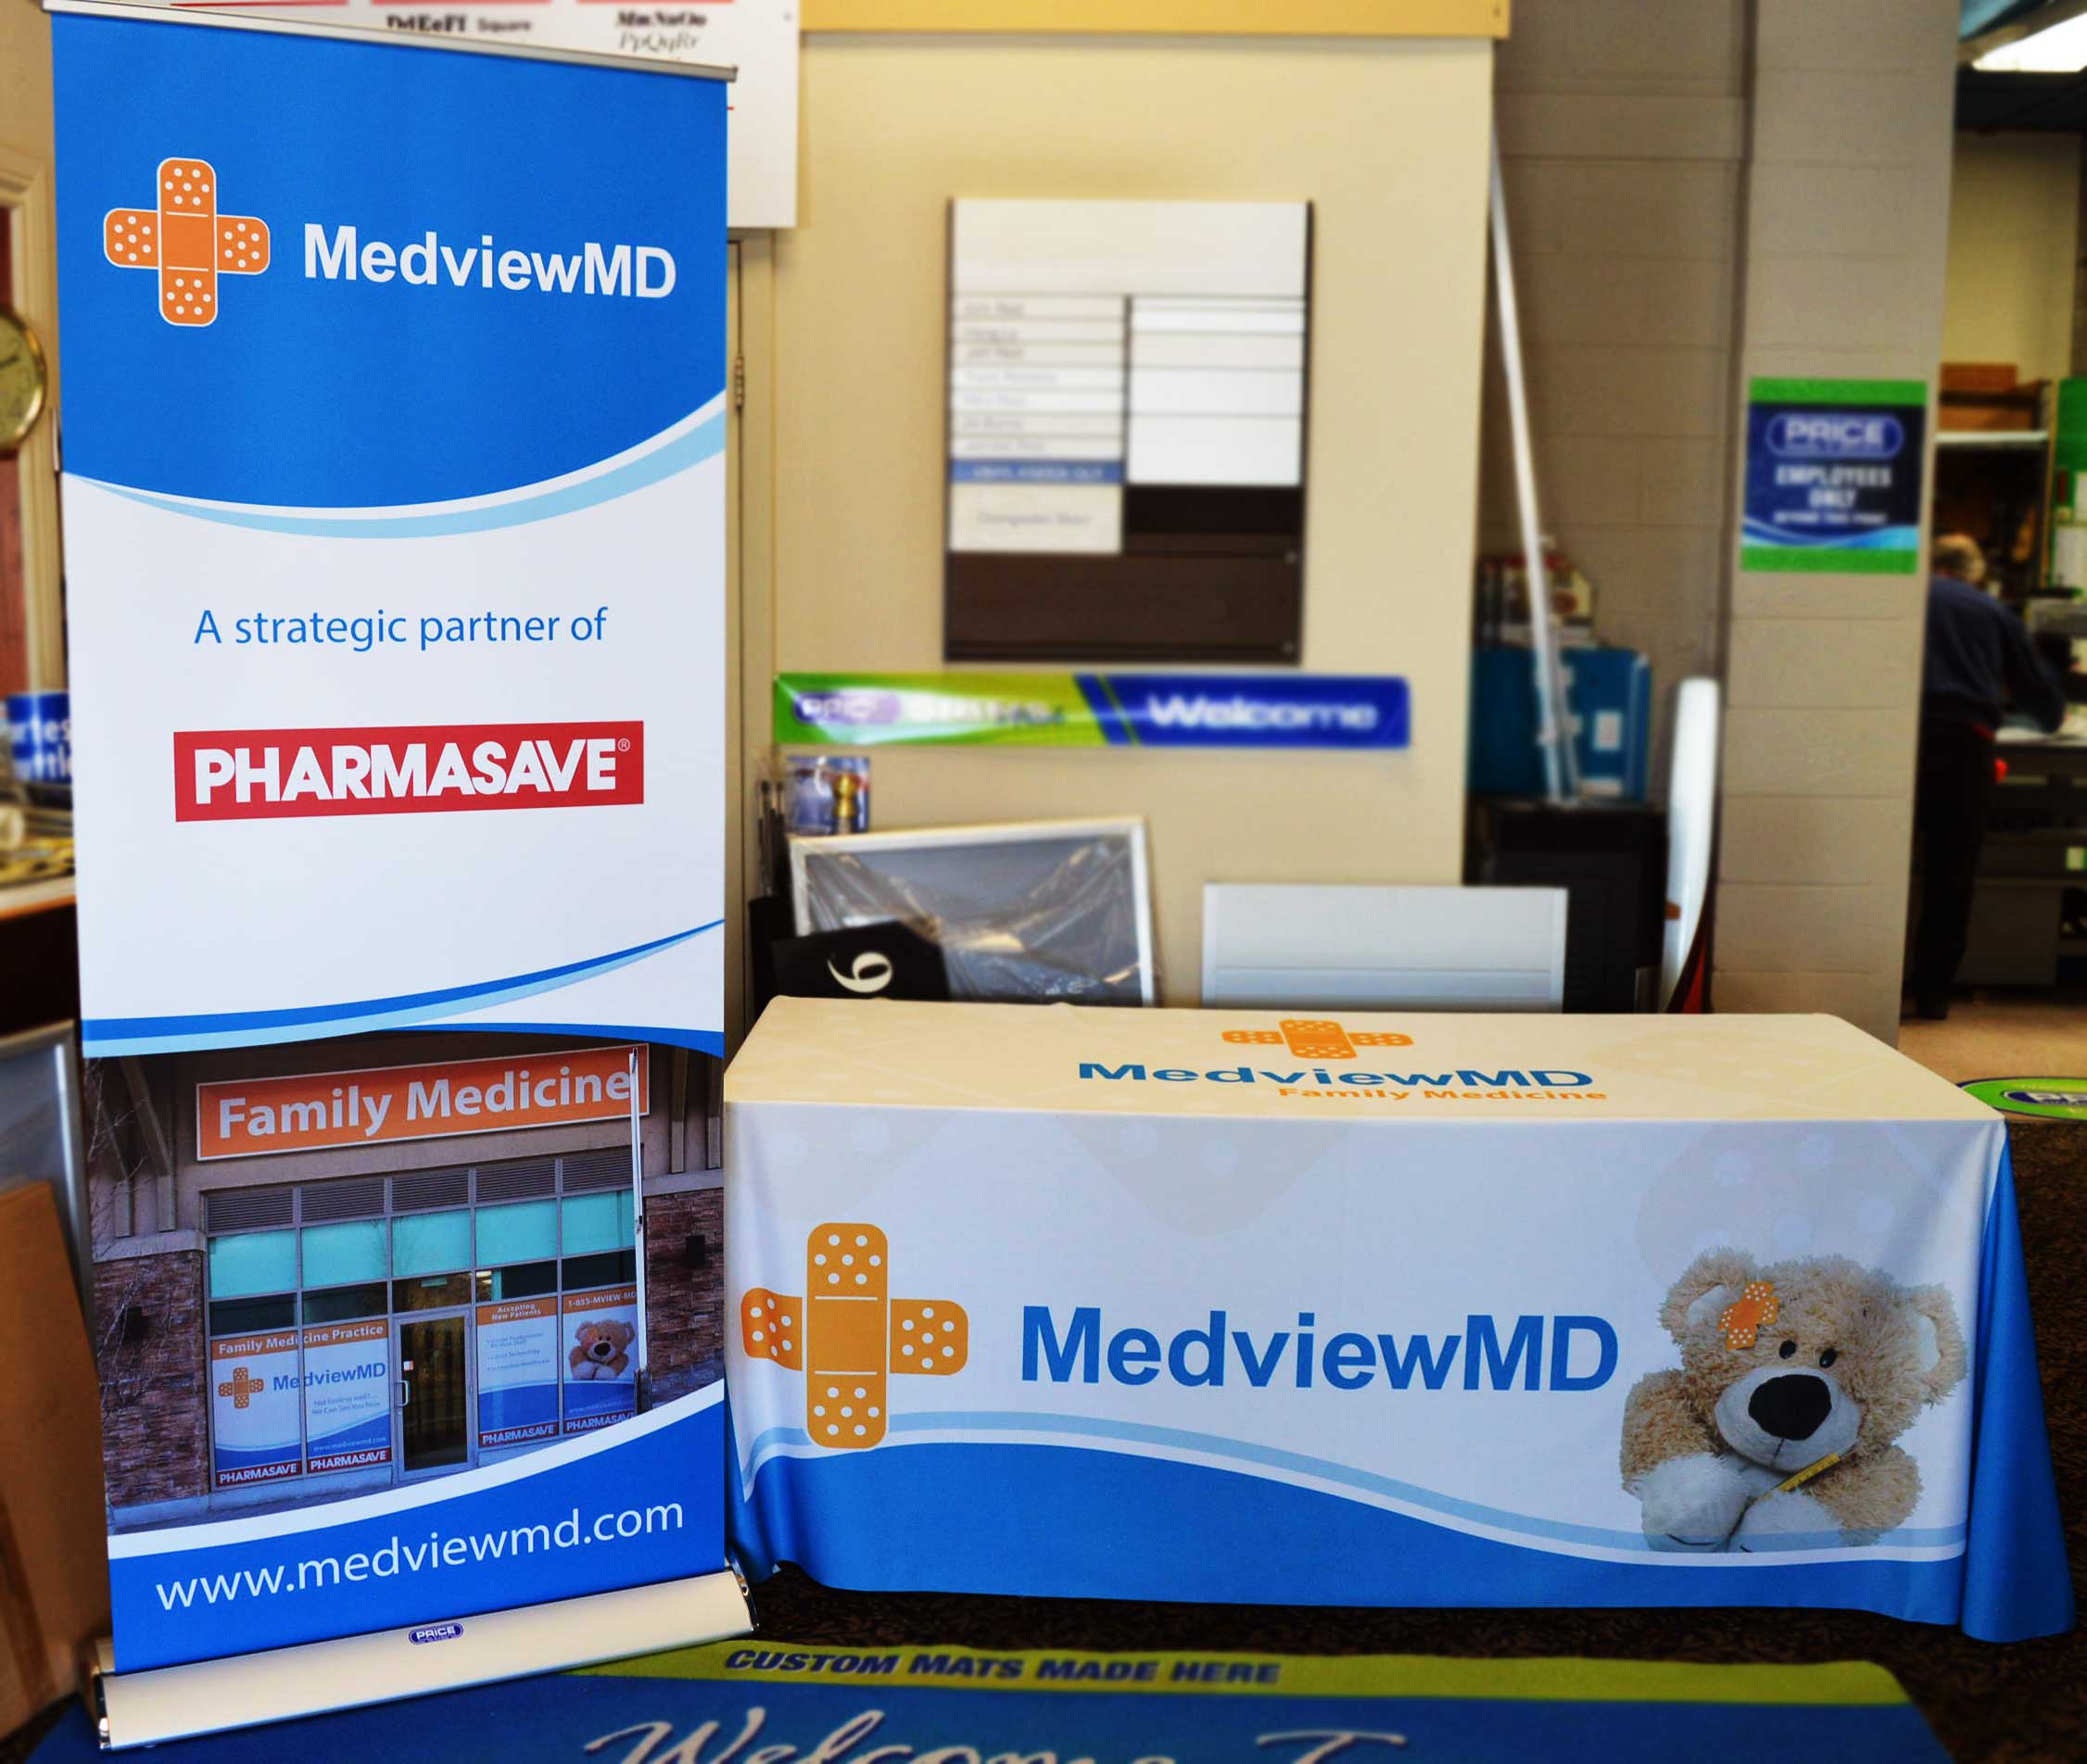 MedviewMD - Trade Show Displays and Bannerstand